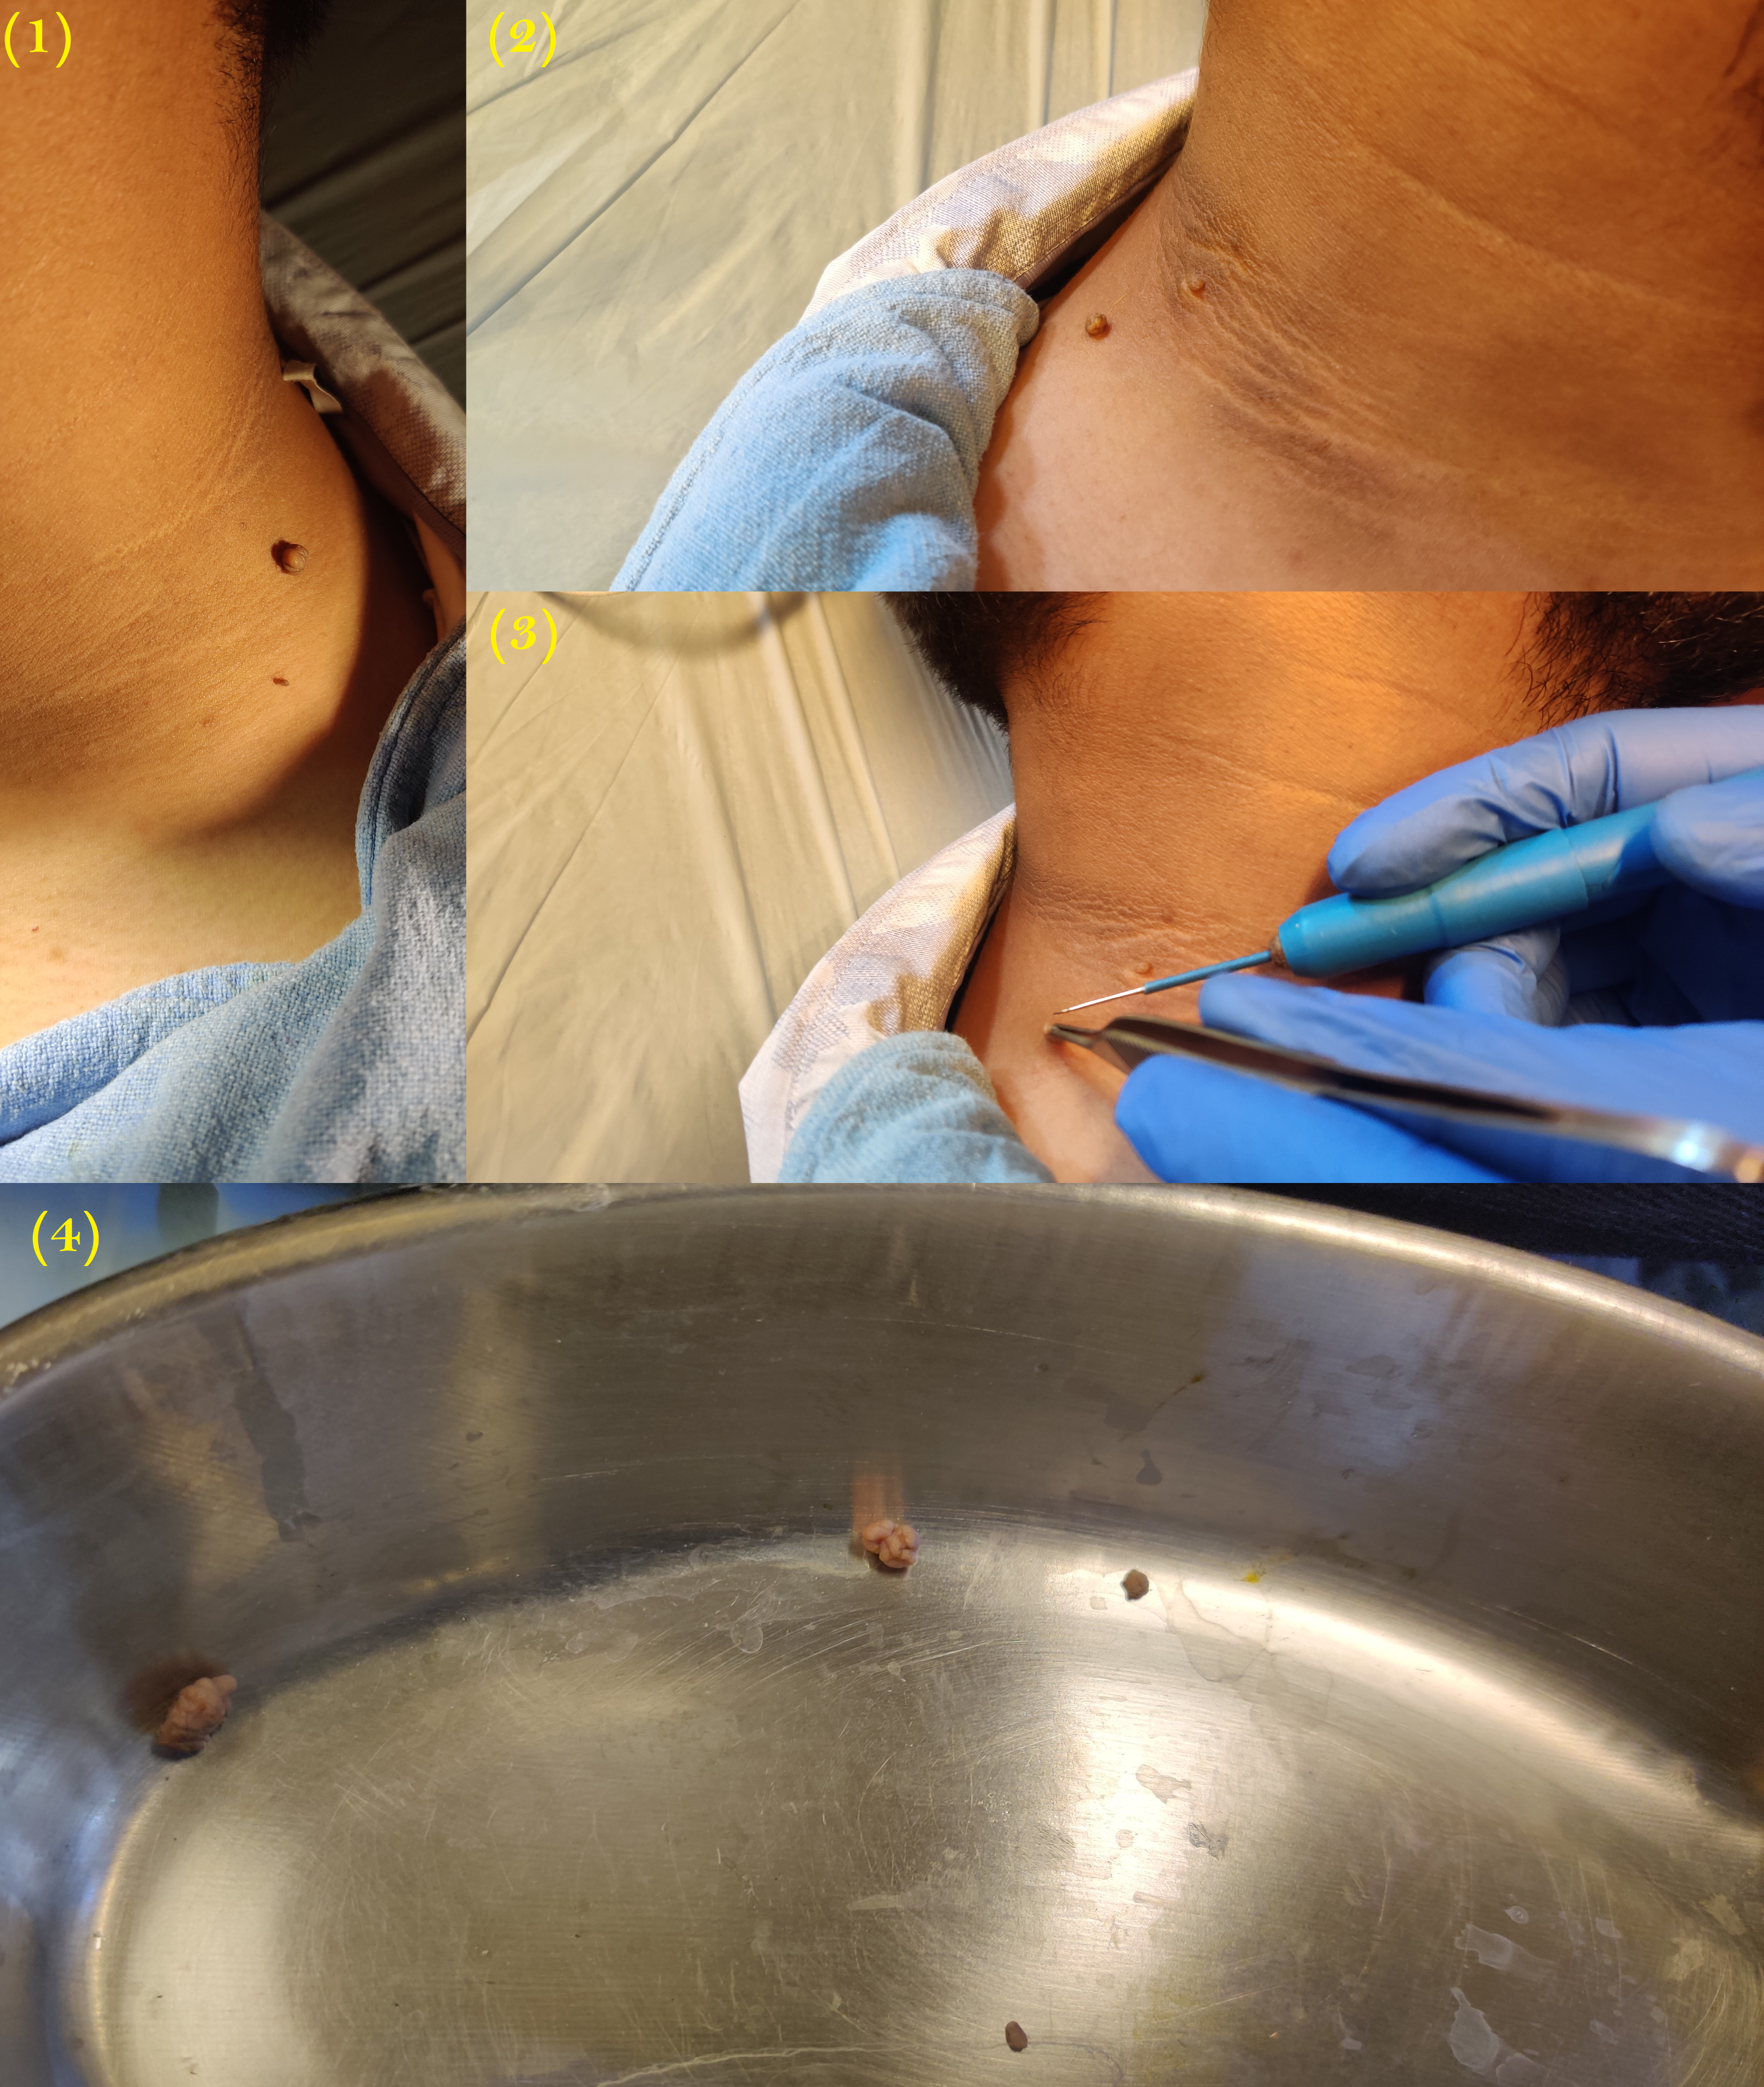 Images of skin tags and their removal using the radio cautery in the area surrounding the neck region.
Also seen in the images Acanthosis Nigricans of the neck indicating the association of skin tags with diabetes and pre-diabetes